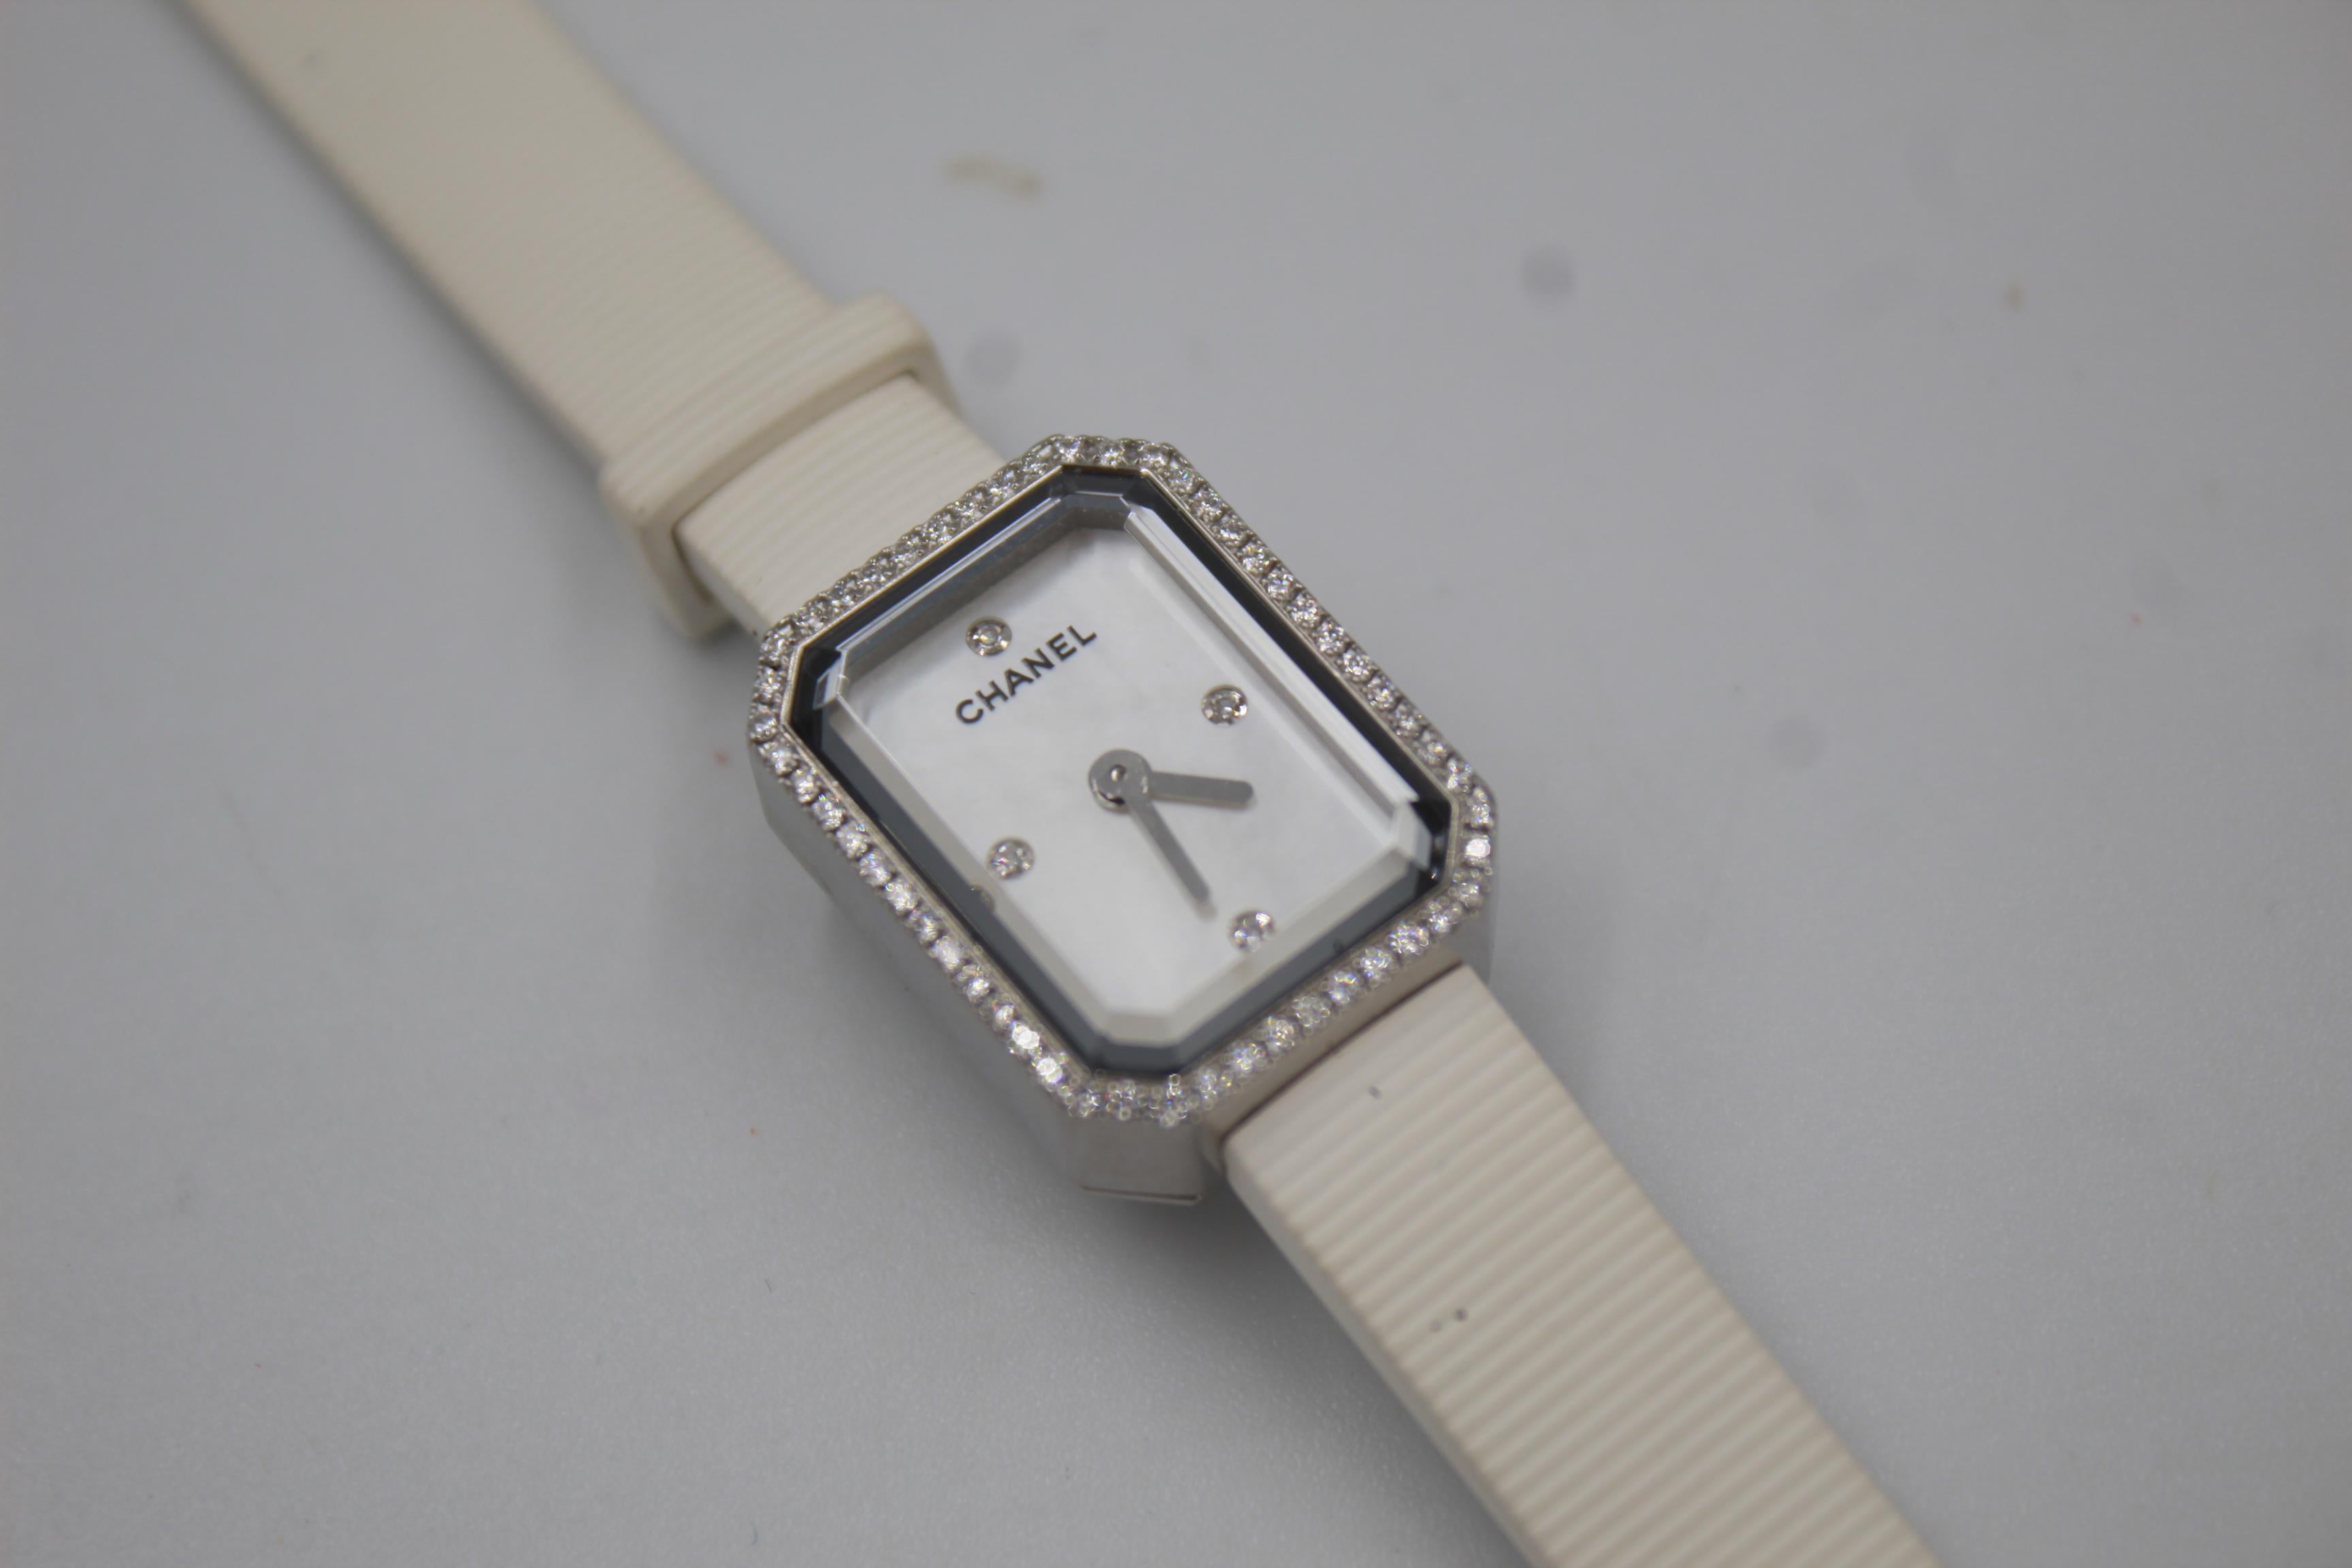 Chanel watch in white rubber and diamonds.
Good condition.
System : quartz.
20cm. watch face : 2cm x 1.5cm 
